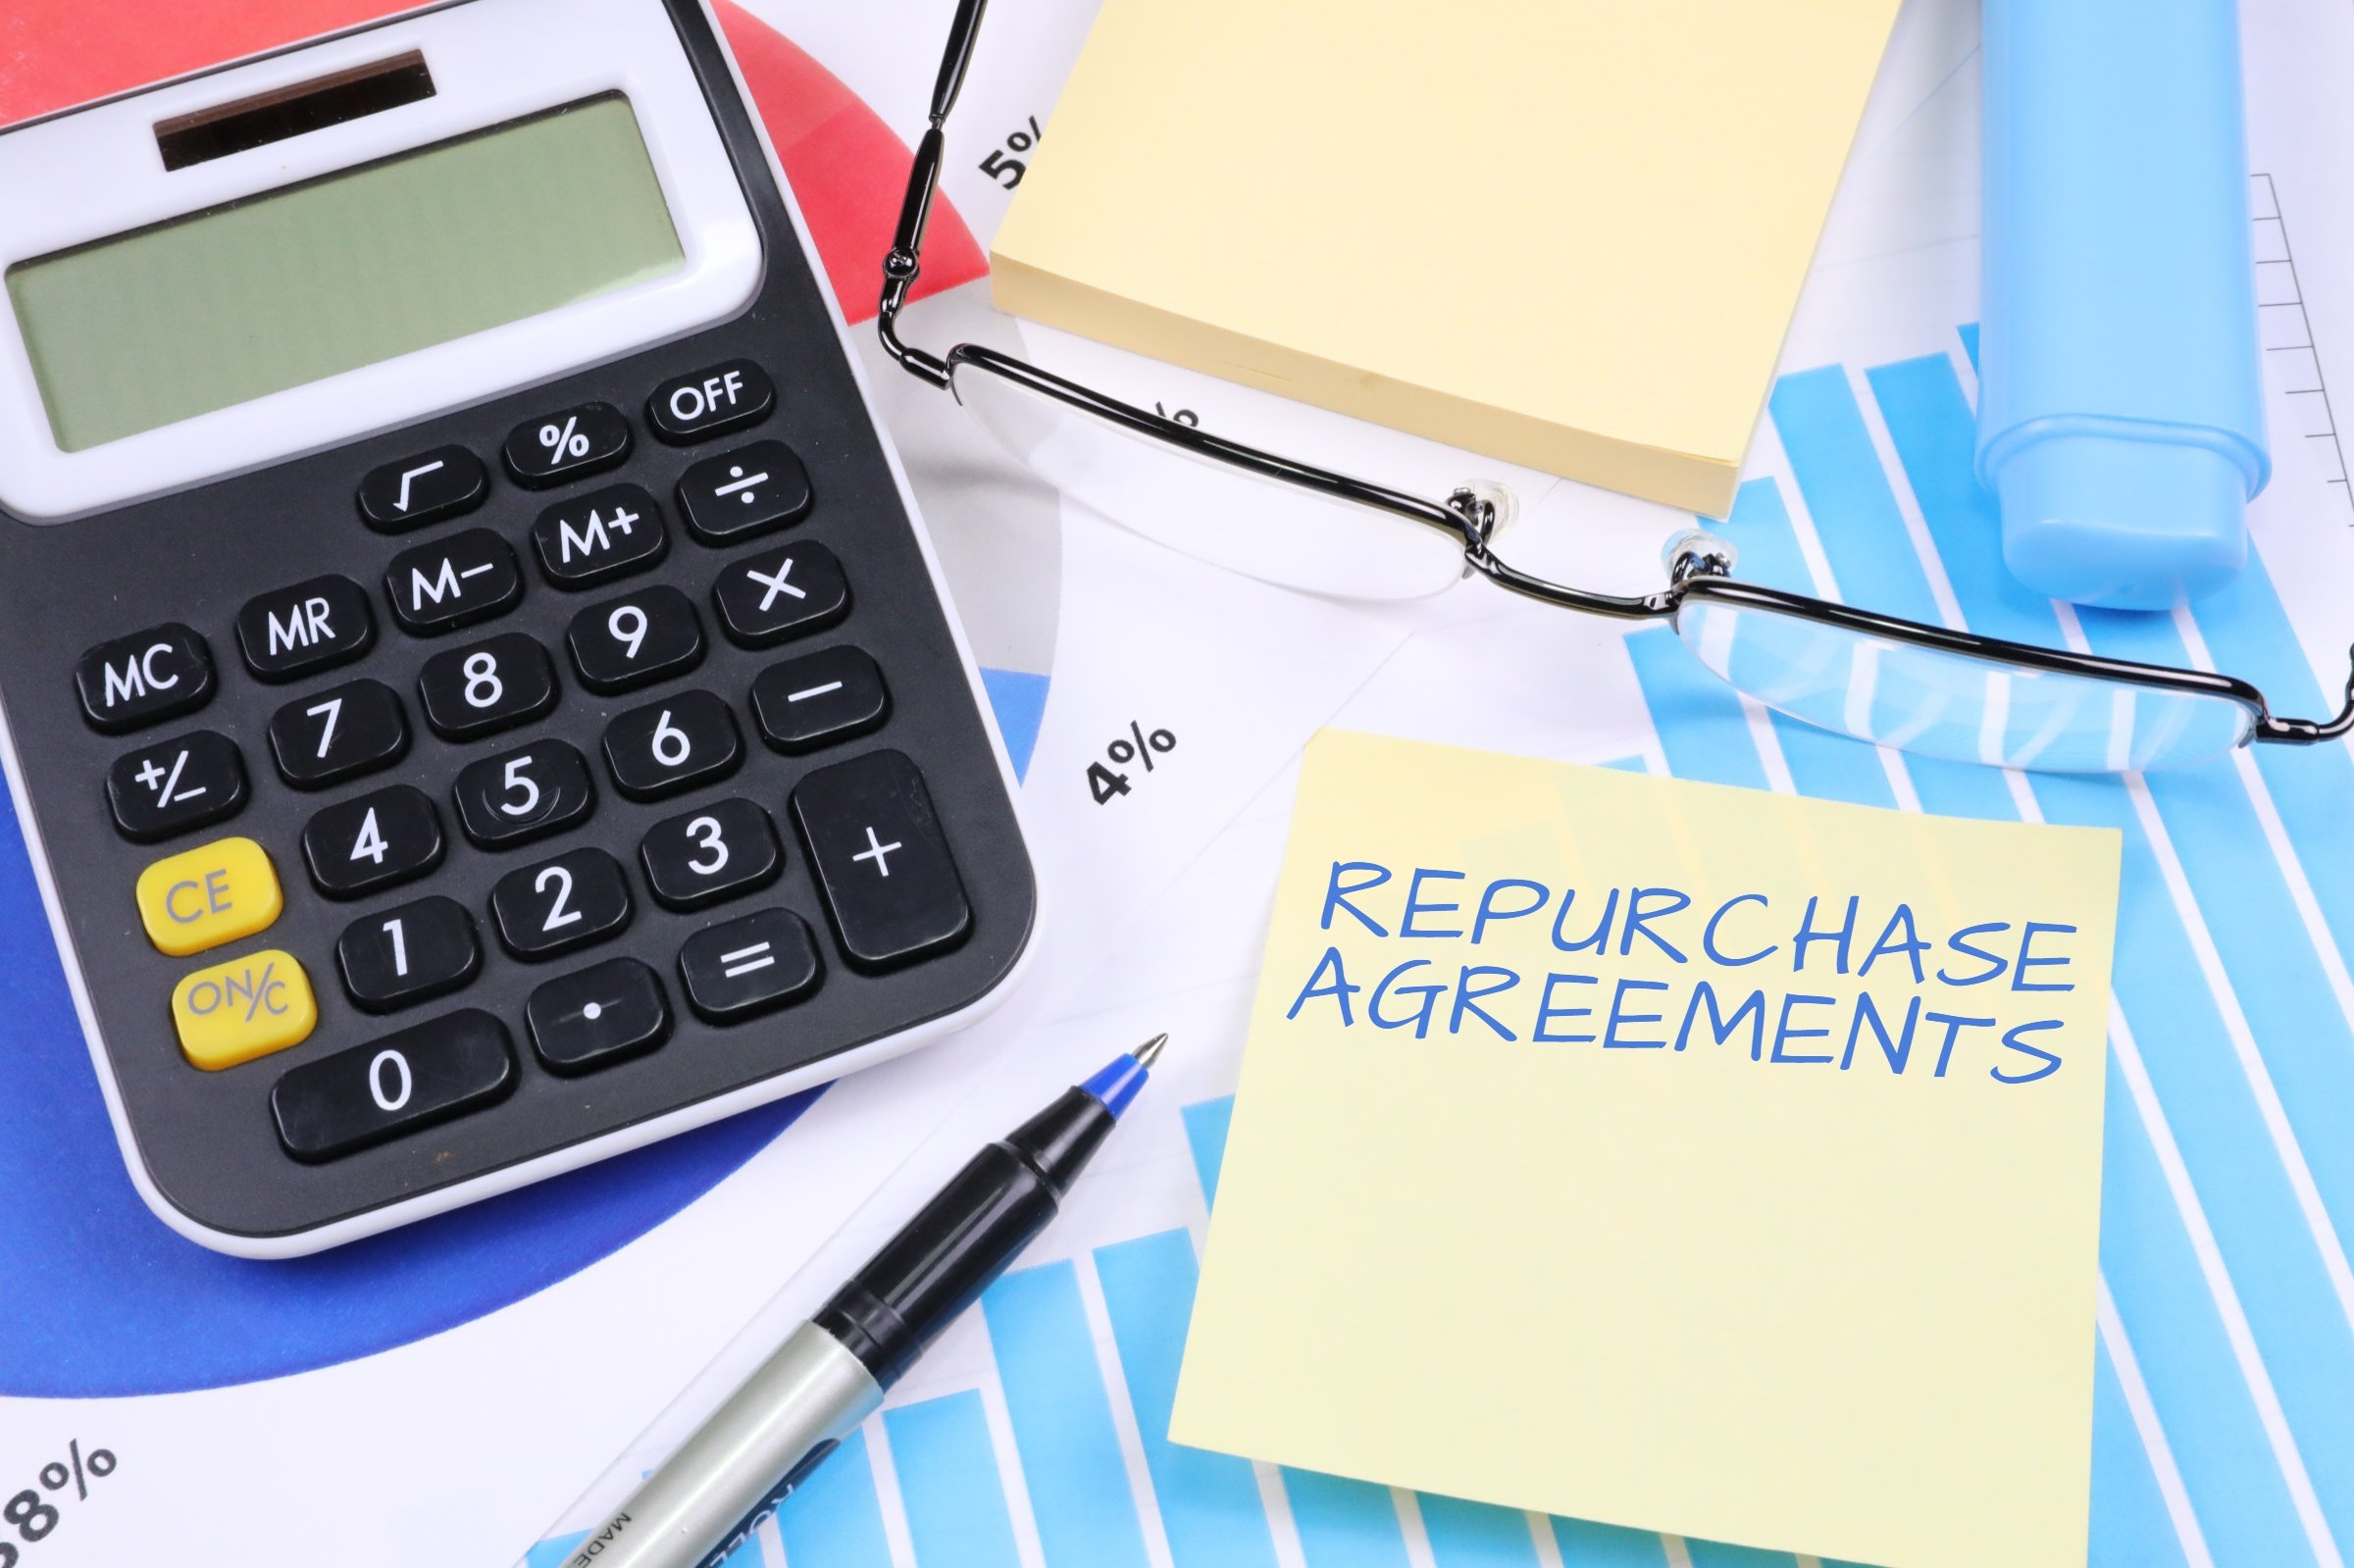 Repurchase Agreements